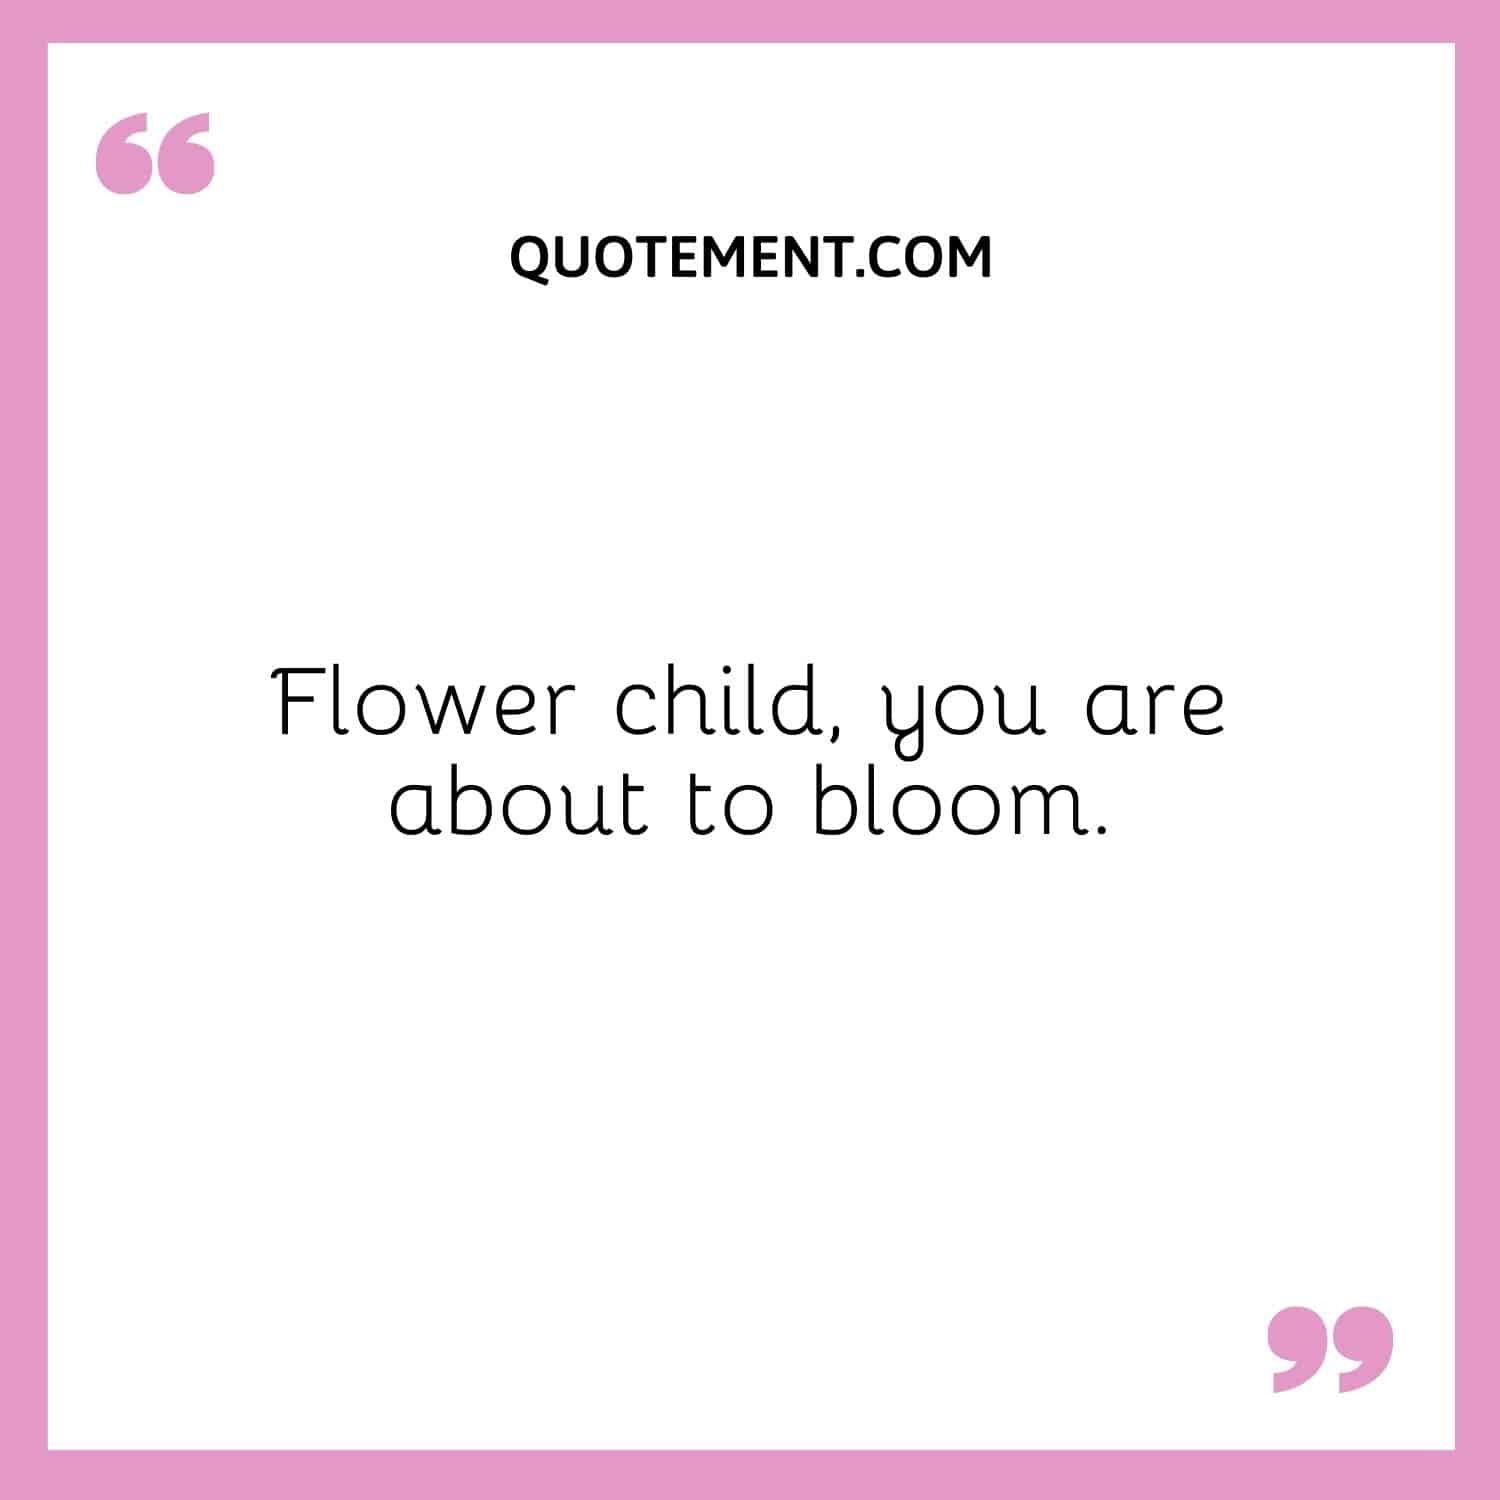 Flower child, you are about to bloom.